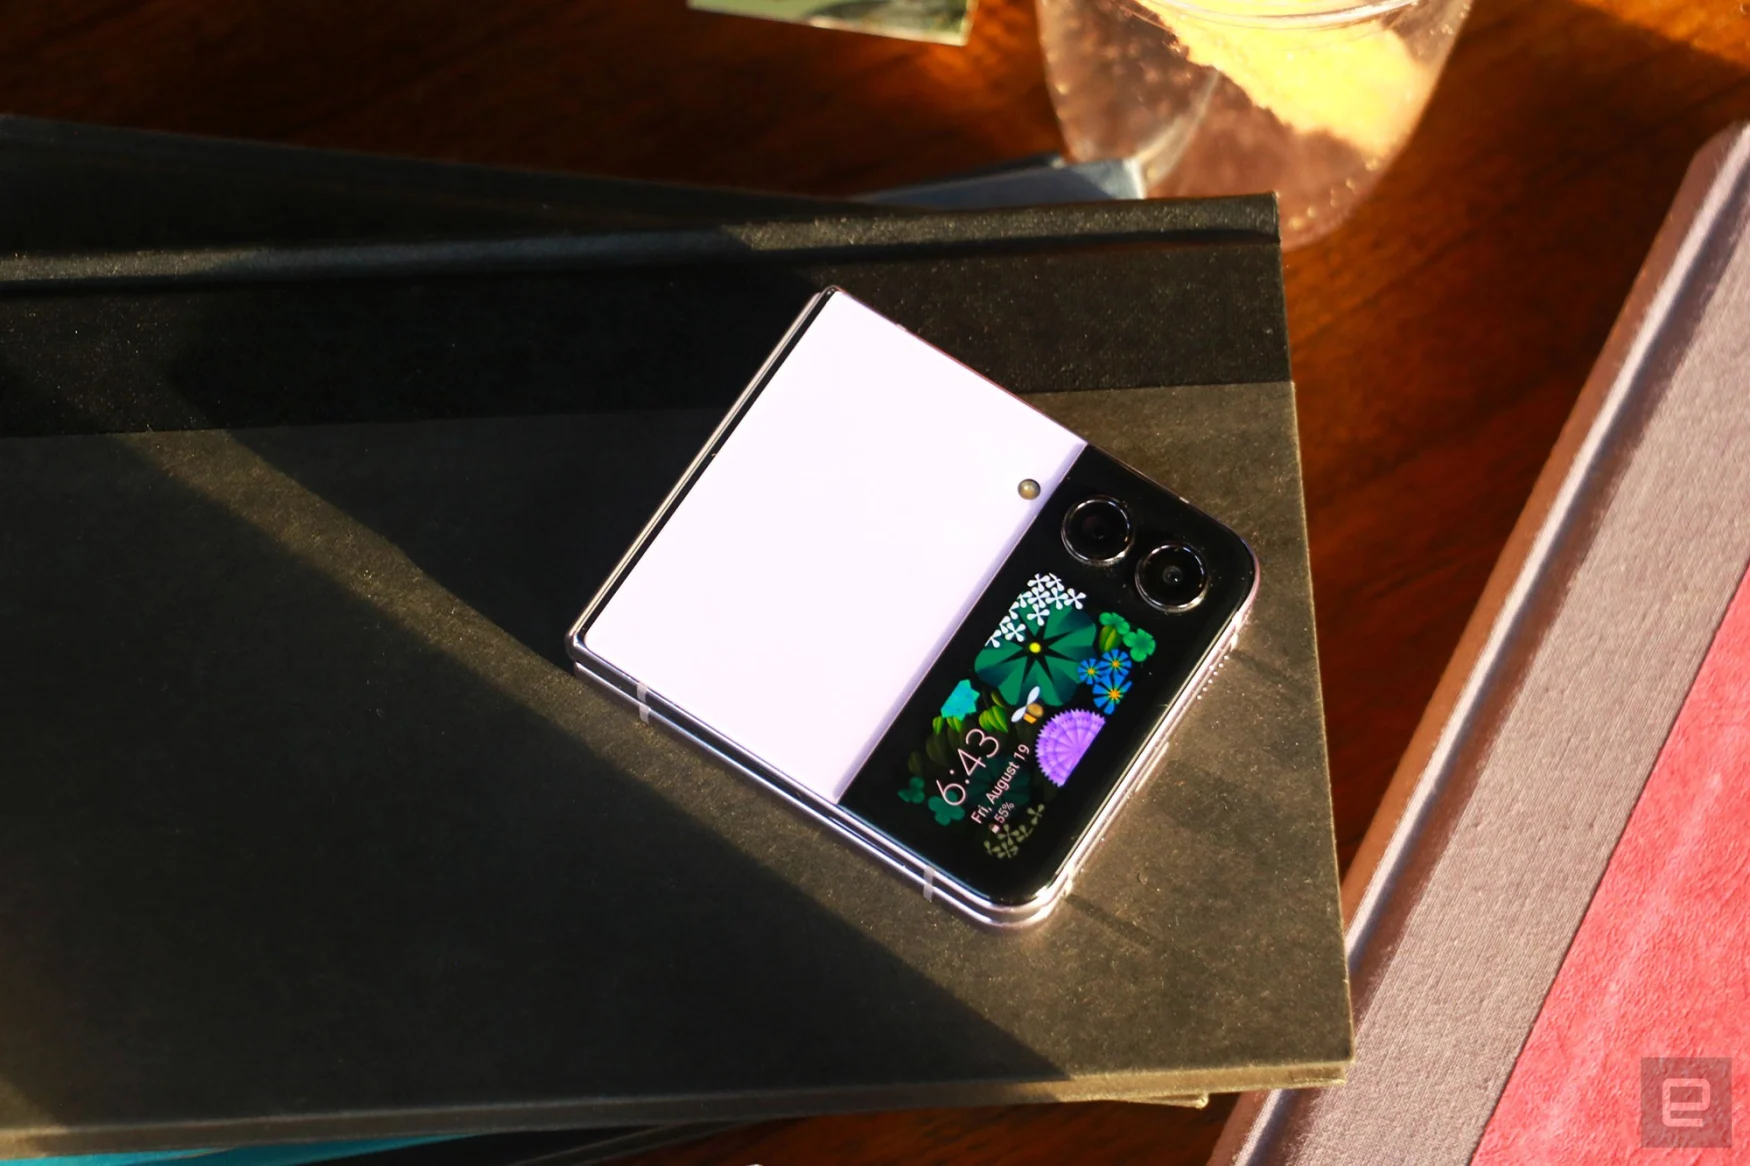 The Galaxy Z Flip 4 closed, with its cover display facing up, laying on a slightly cluttered desk.